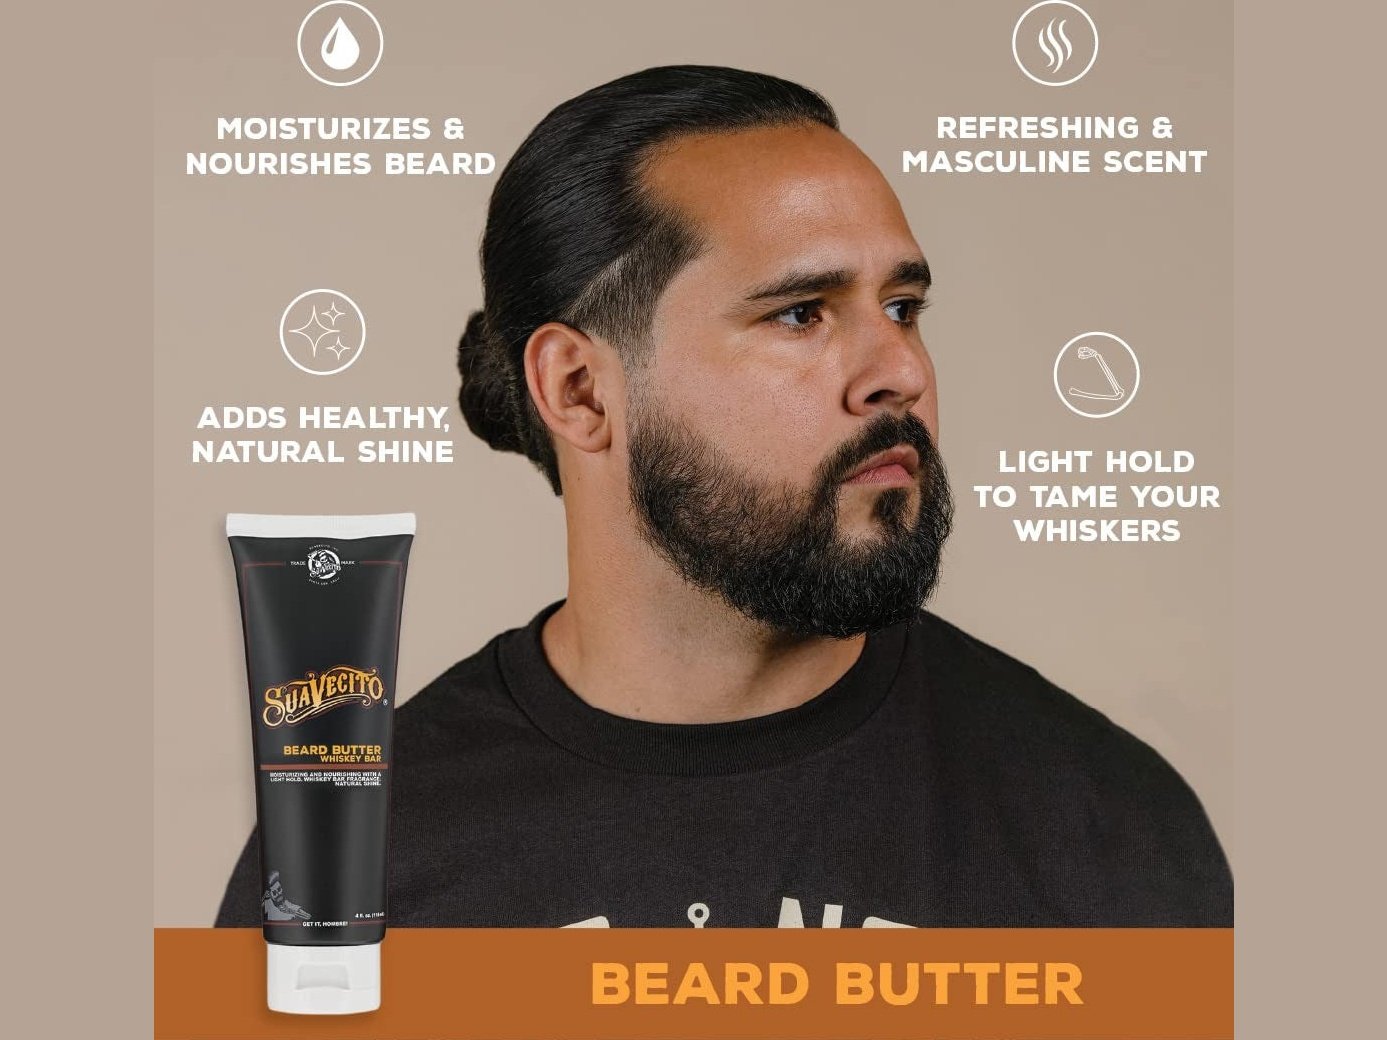 Load image into Gallery viewer, Suavecito Whiskey Bar Beard Butter, 4 oz.
